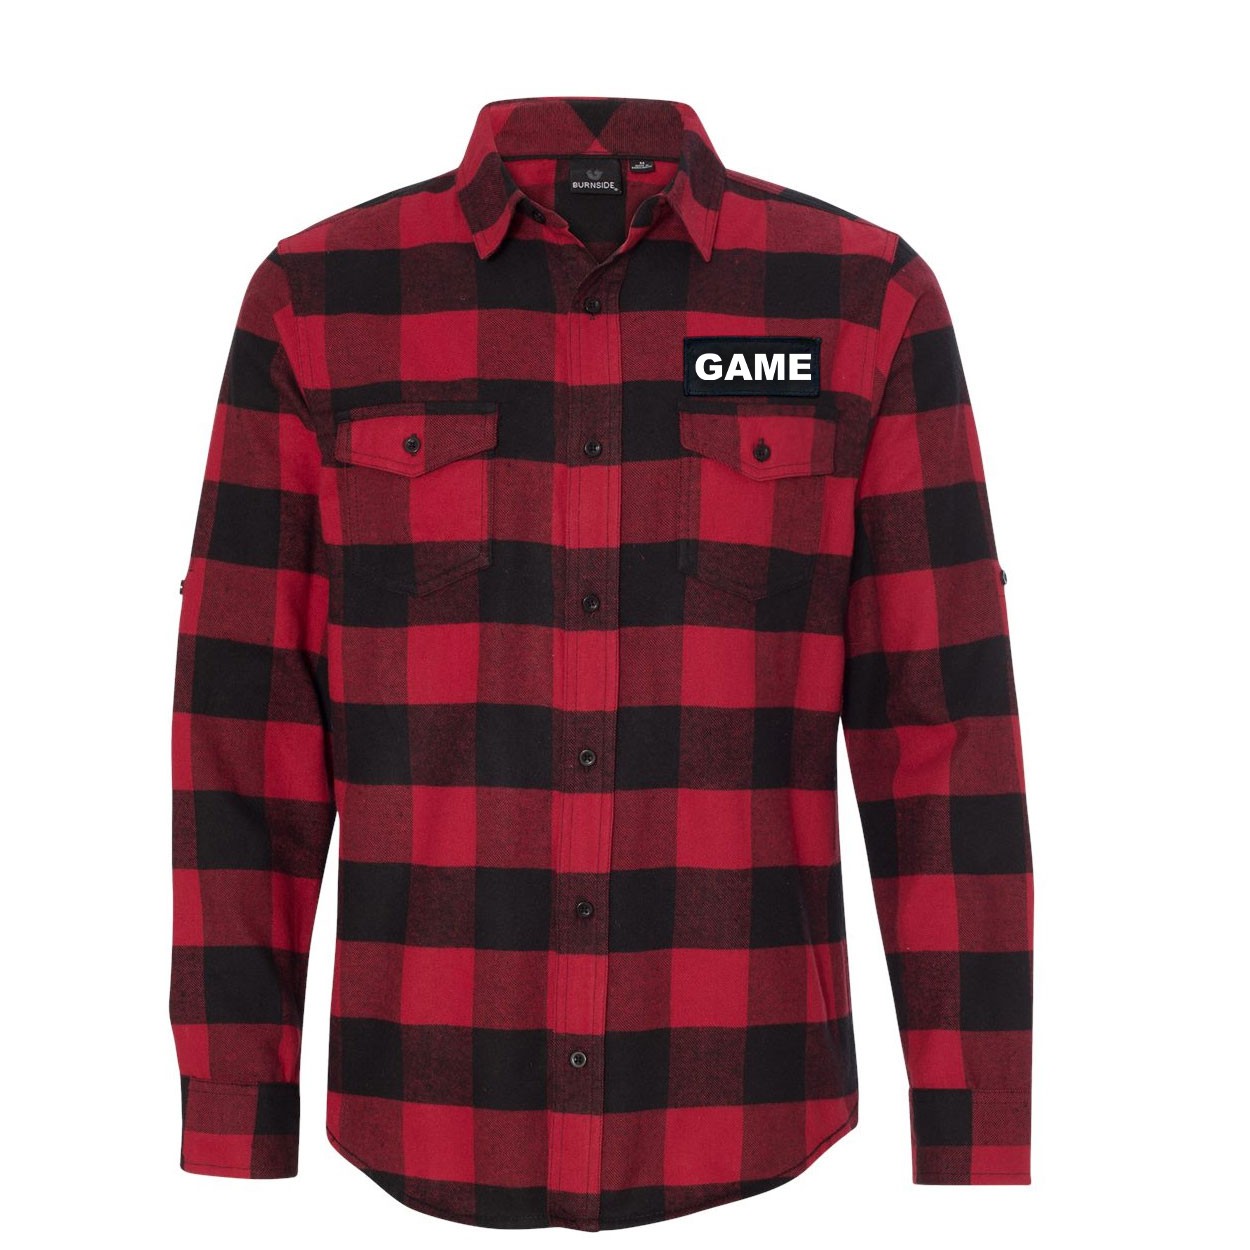 Game Brand Logo Classic Unisex Long Sleeve Woven Patch Flannel Shirt Red/Black Buffalo (White Logo)